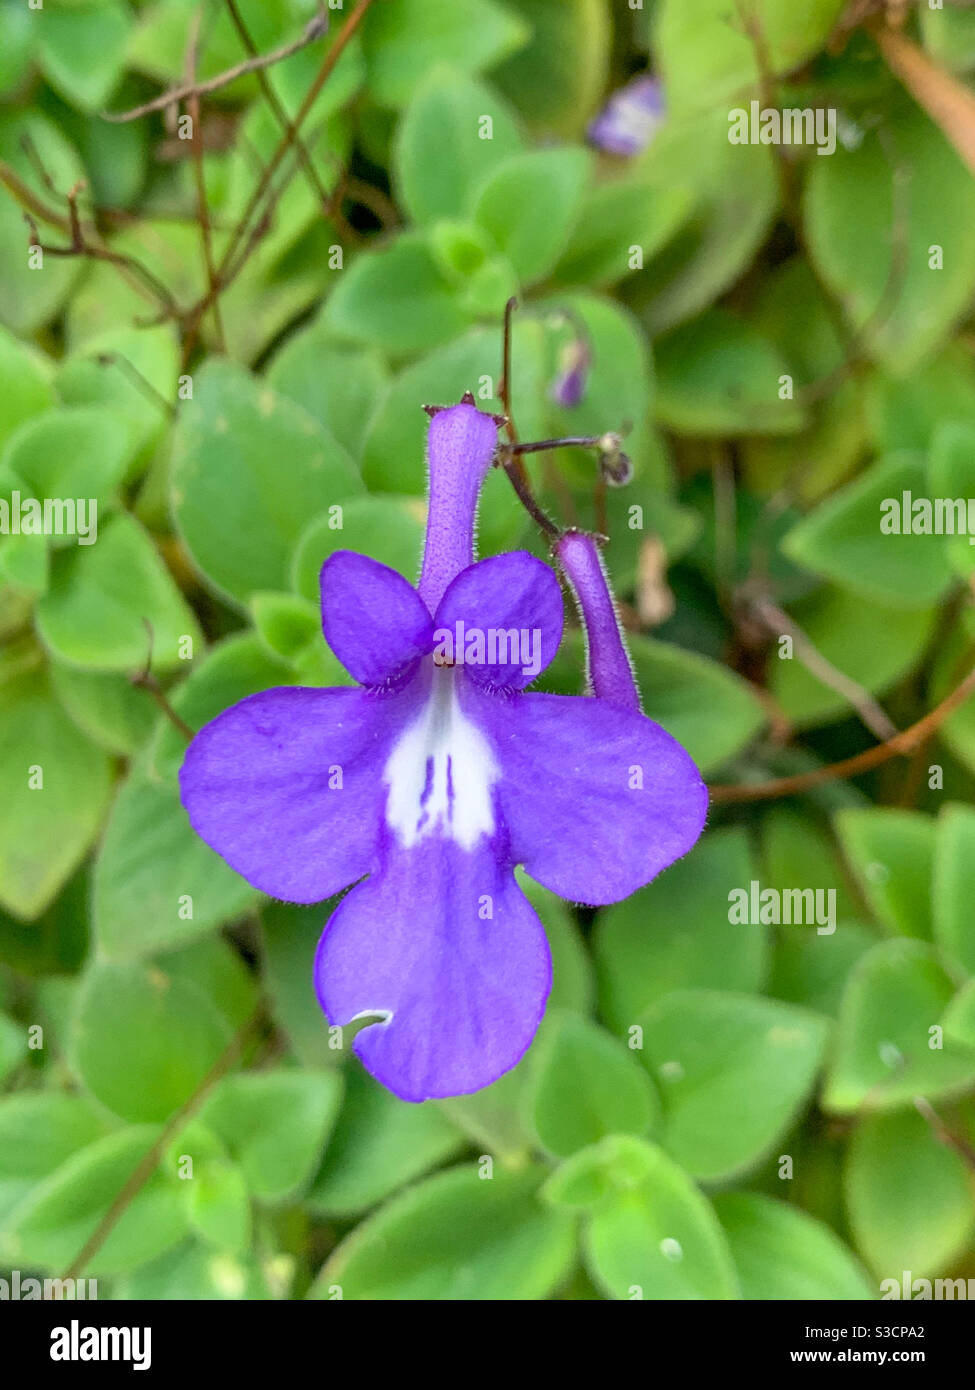 A single Purple nodding violet in front of green leaf background Stock Photo